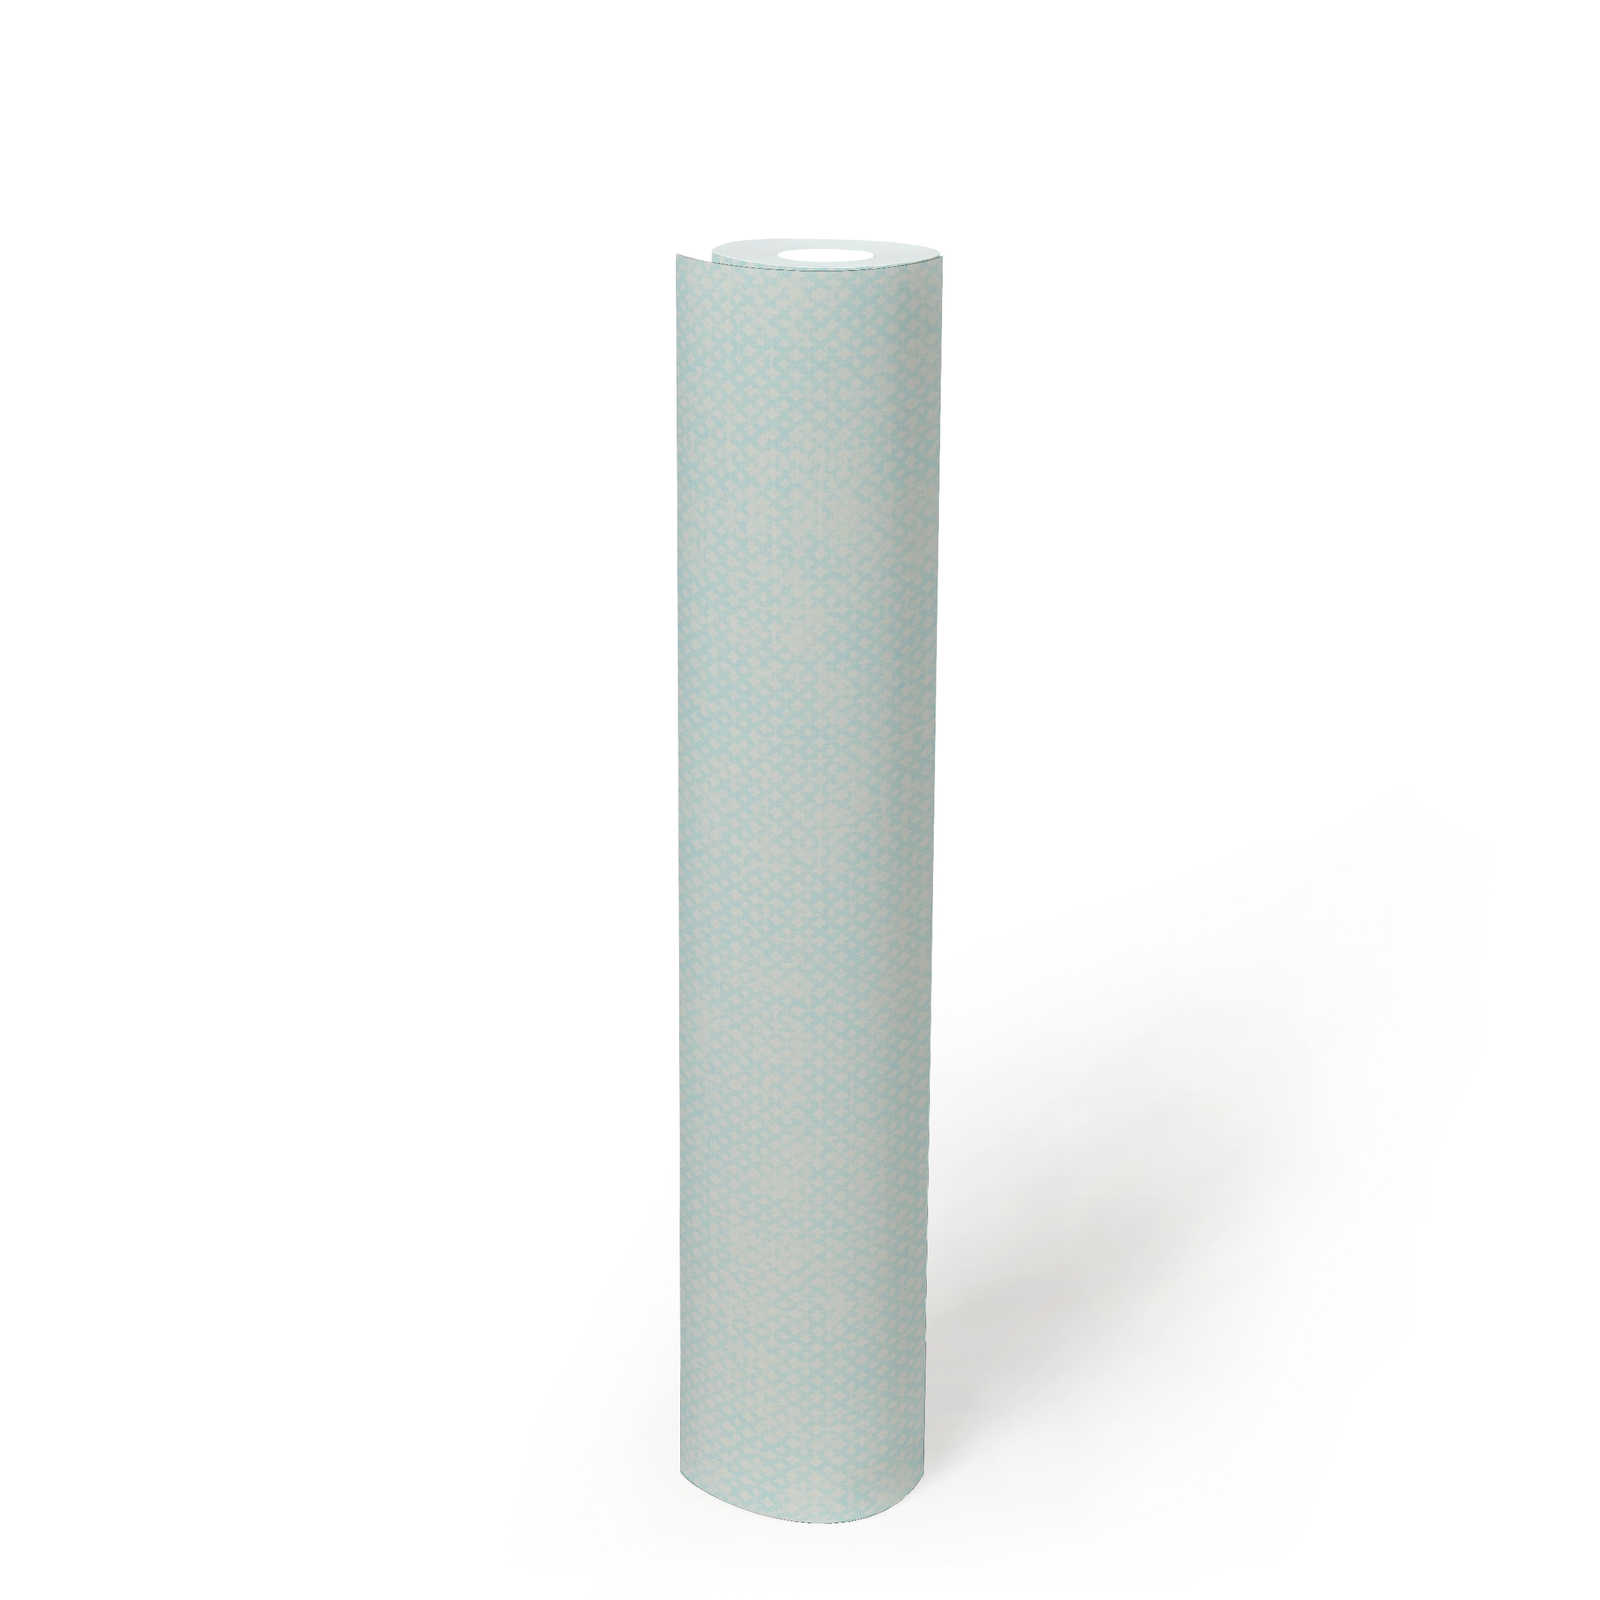             Non-woven wallpaper with fine textured pattern - blue, white
        